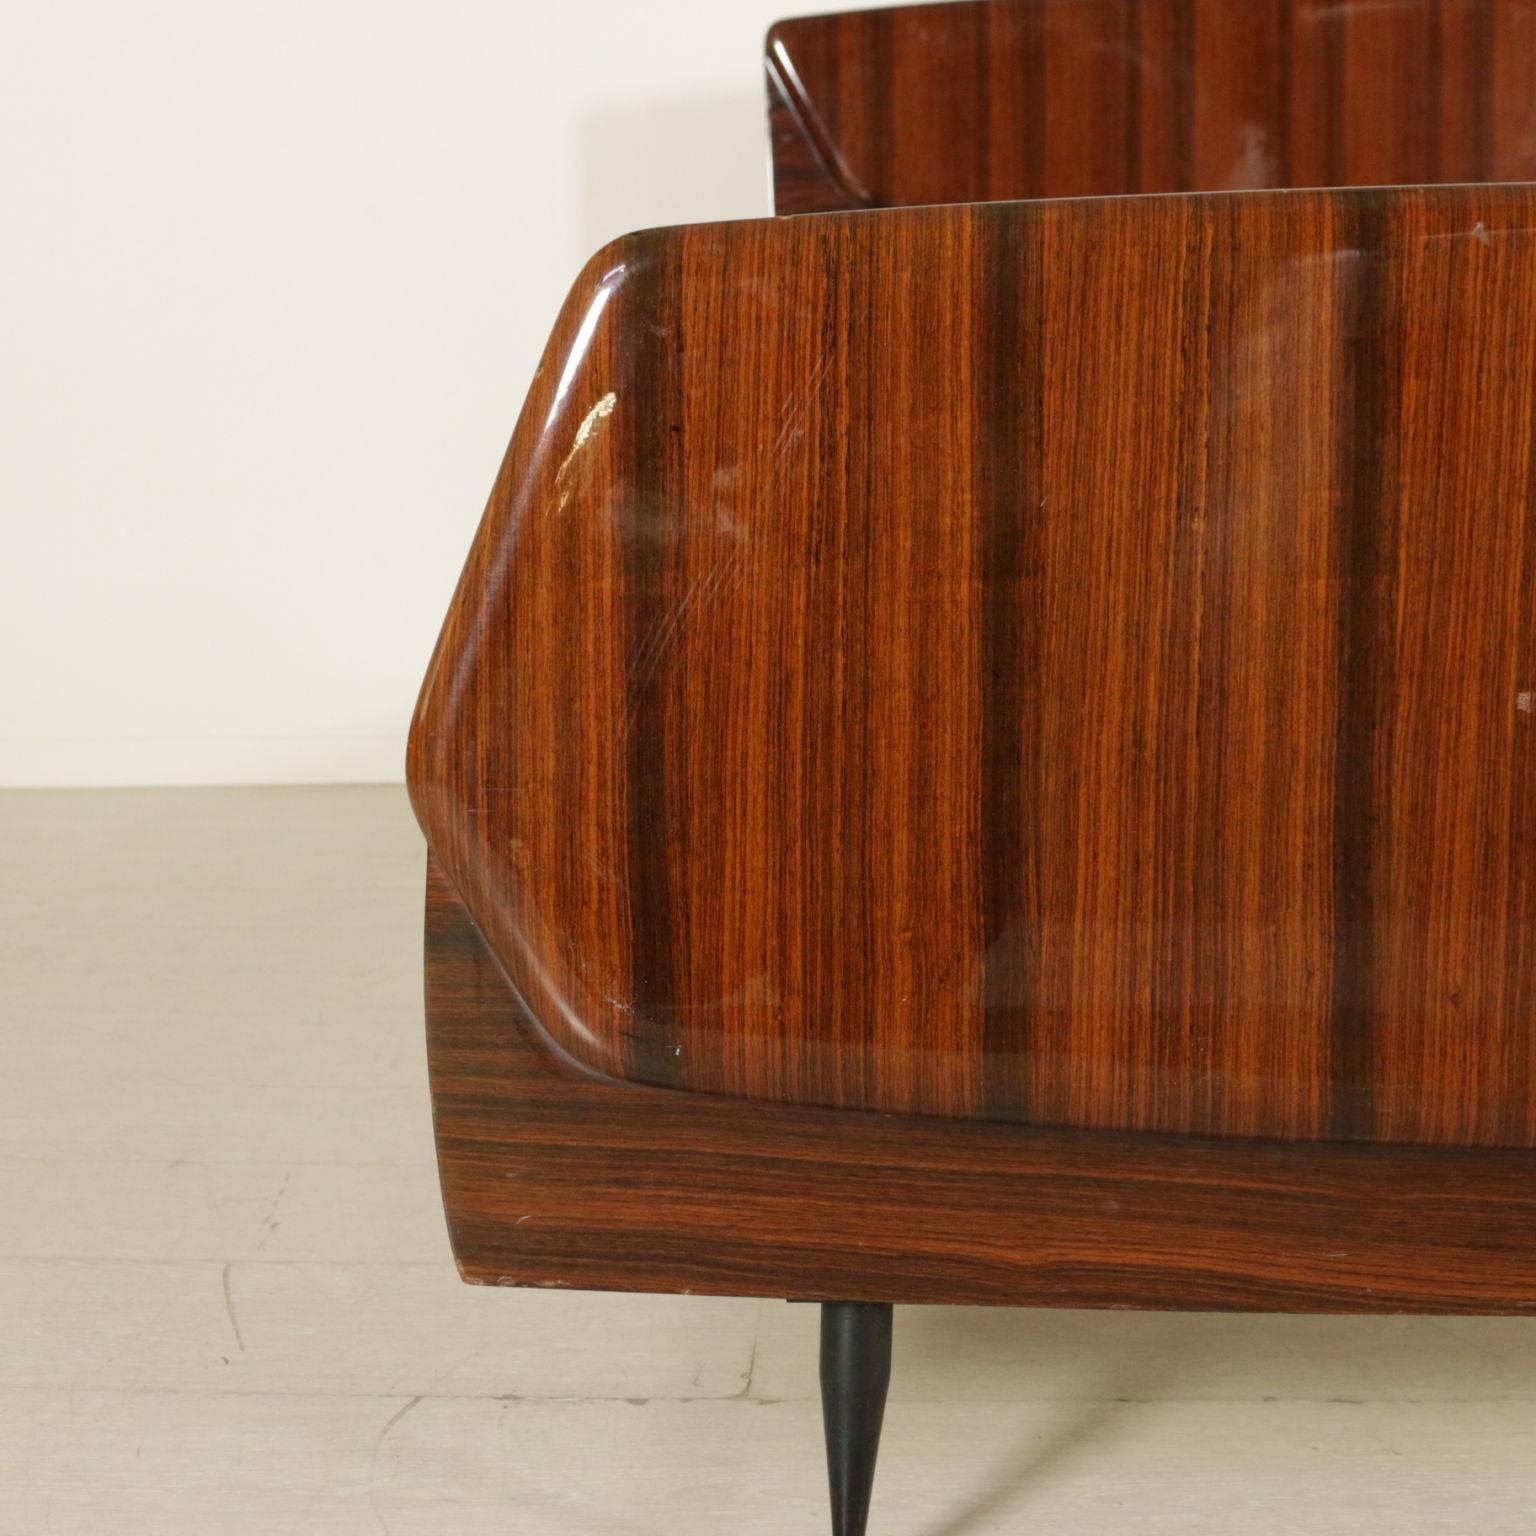 Mid-20th Century Double Bed Rosewood Veneer Vintage Manufactured in Italy, 1950s-1960s